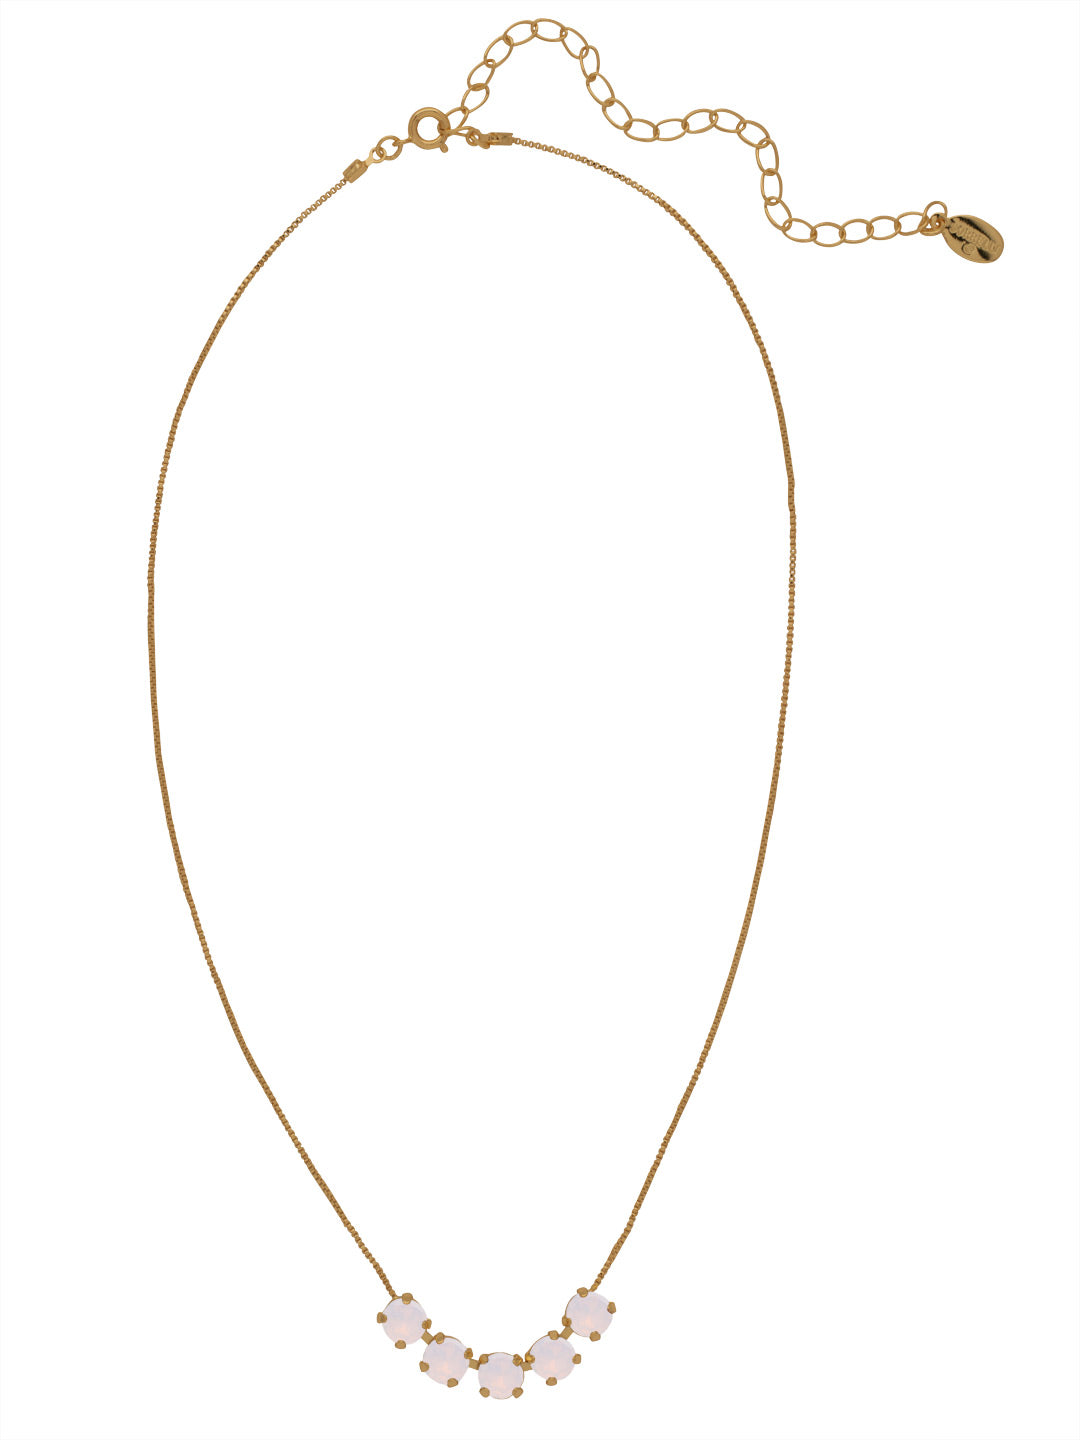 Shaughna Tennis Necklace - NFC84AGROW - <p>The Shaughna Tennis Necklace features five crystals on a delicate adjustable chain. From Sorrelli's Rose Water collection in our Antique Gold-tone finish.</p>